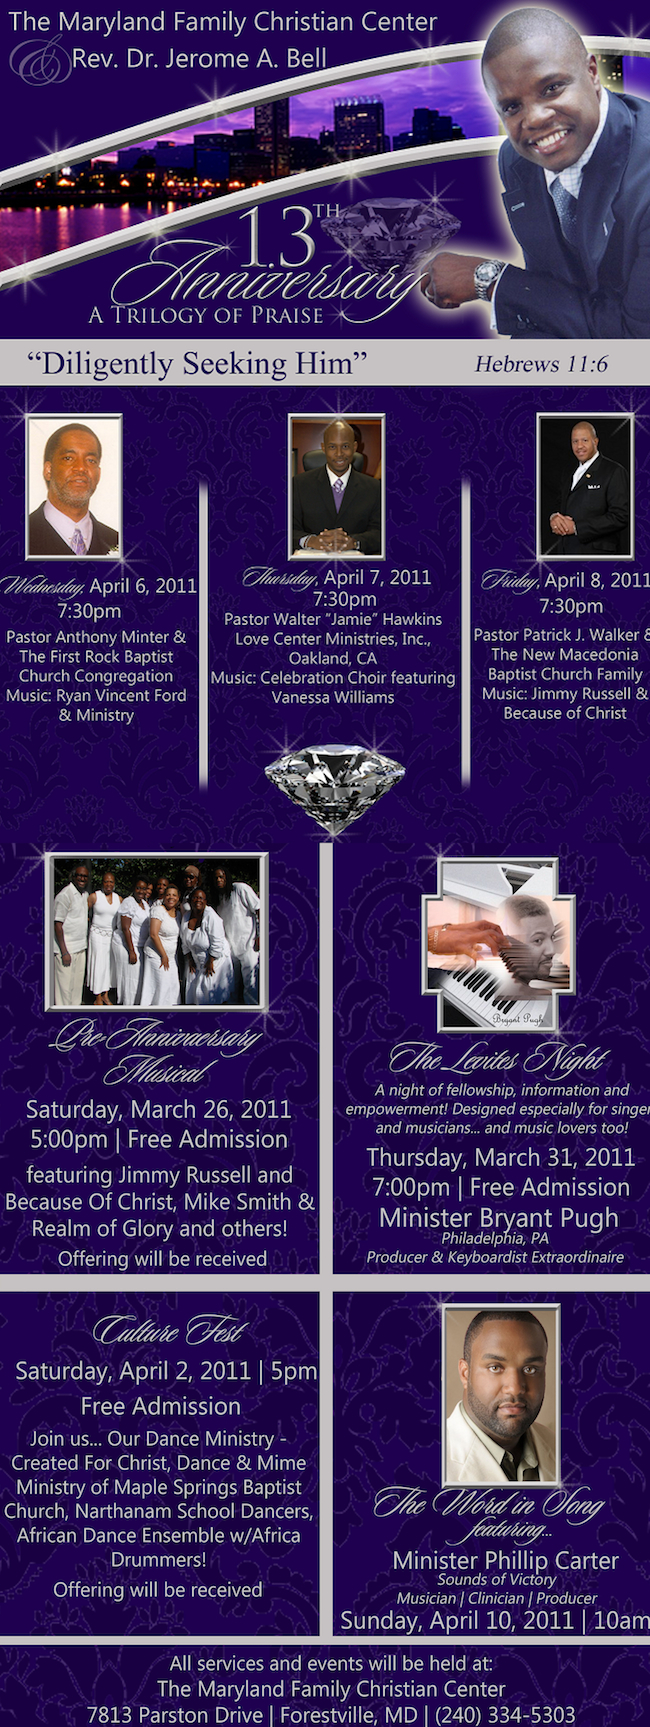 The Maryland Family Christian Center (MFCC) and Pastor Jerome A. Bell will Celebrate 13 years with a Series of Events